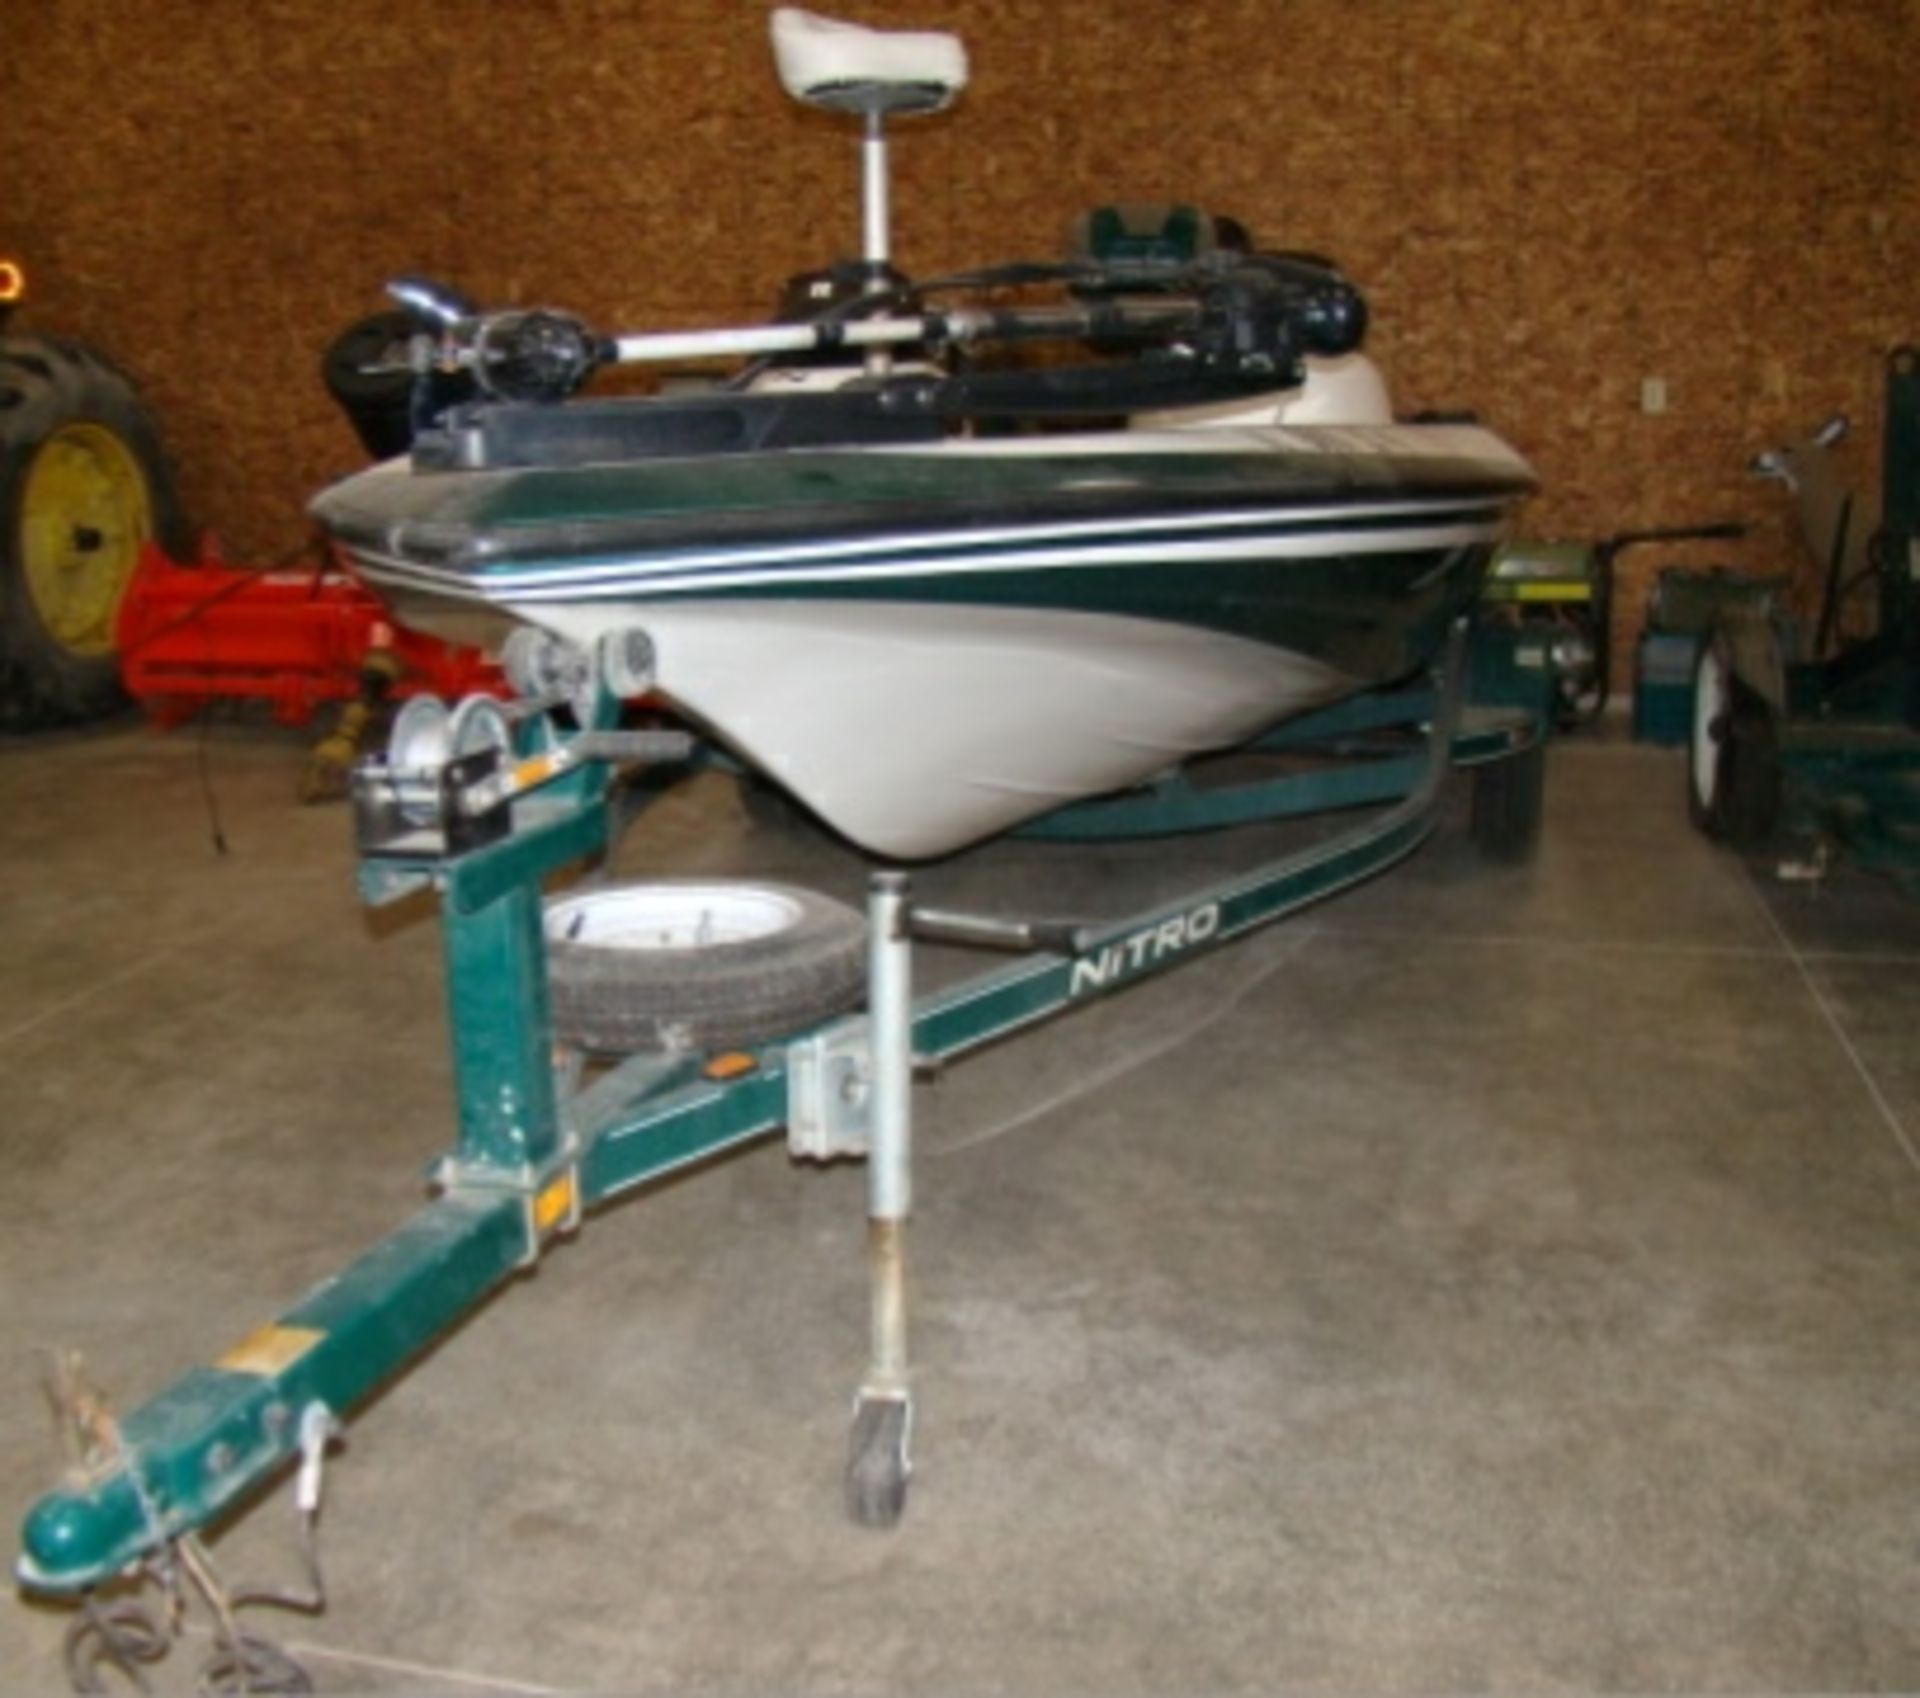 2004 Nitro Bass Boat 700LX w/Mercury 115hp outboard, dual live well storage, 2 depth finders, - Image 2 of 6